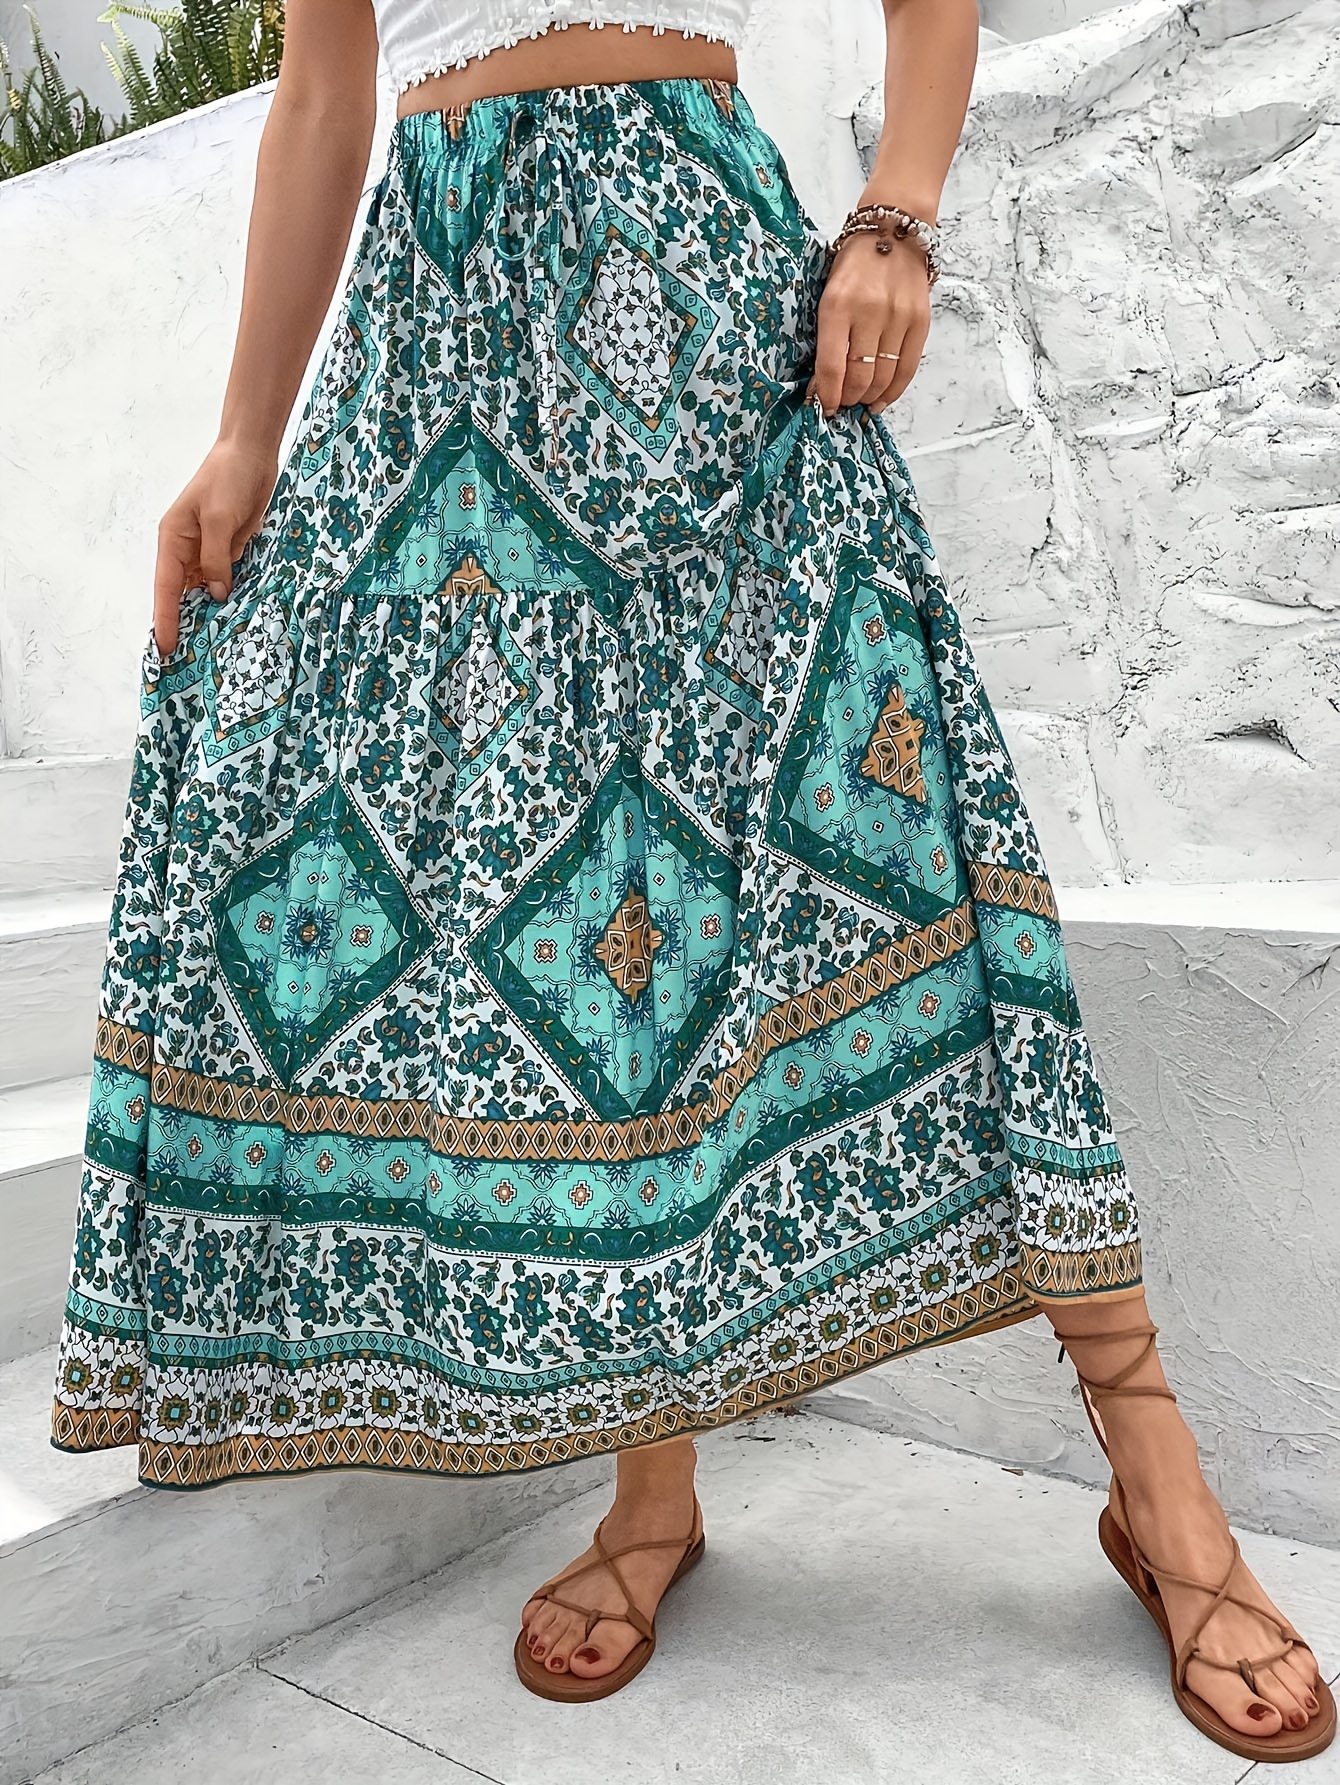 Ethnic Floral Print High Waist Skirt, Vacation Style Maxi Skirt For ...